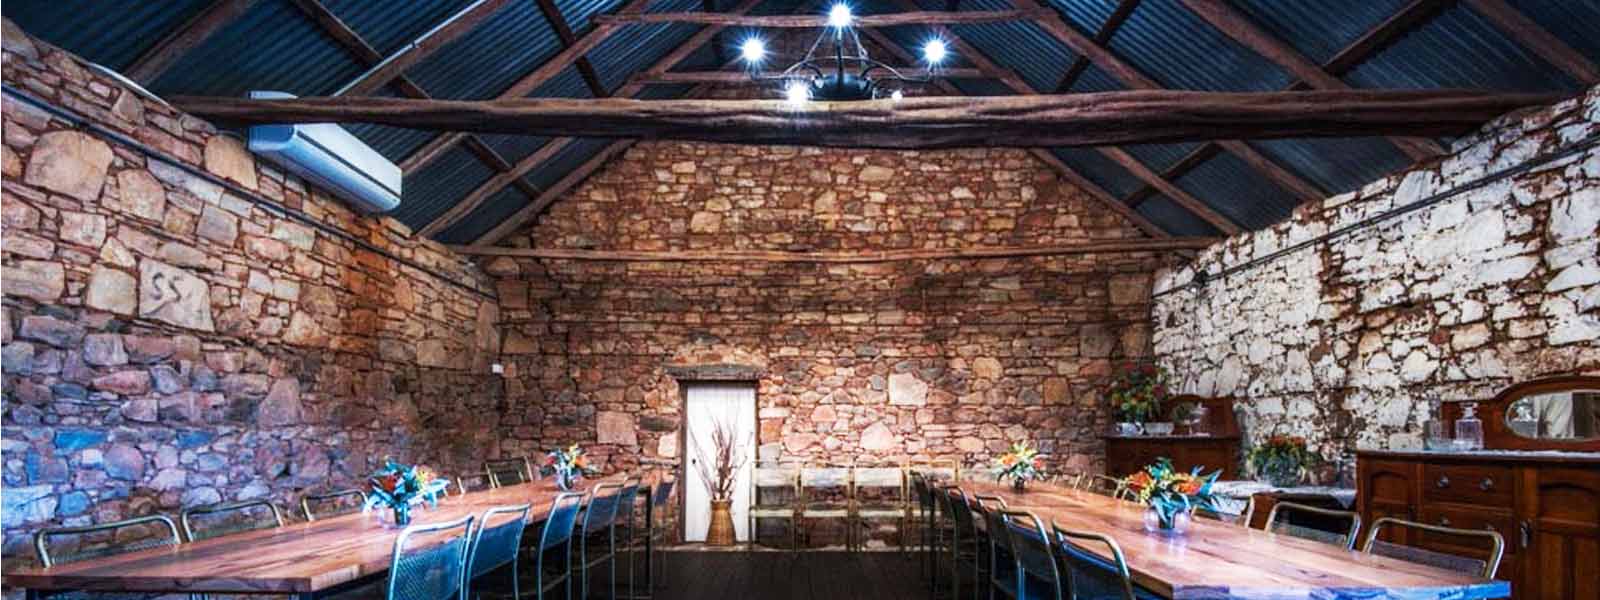 wedding-venue-country, historical-function-centre, celebration-venue, function-venue